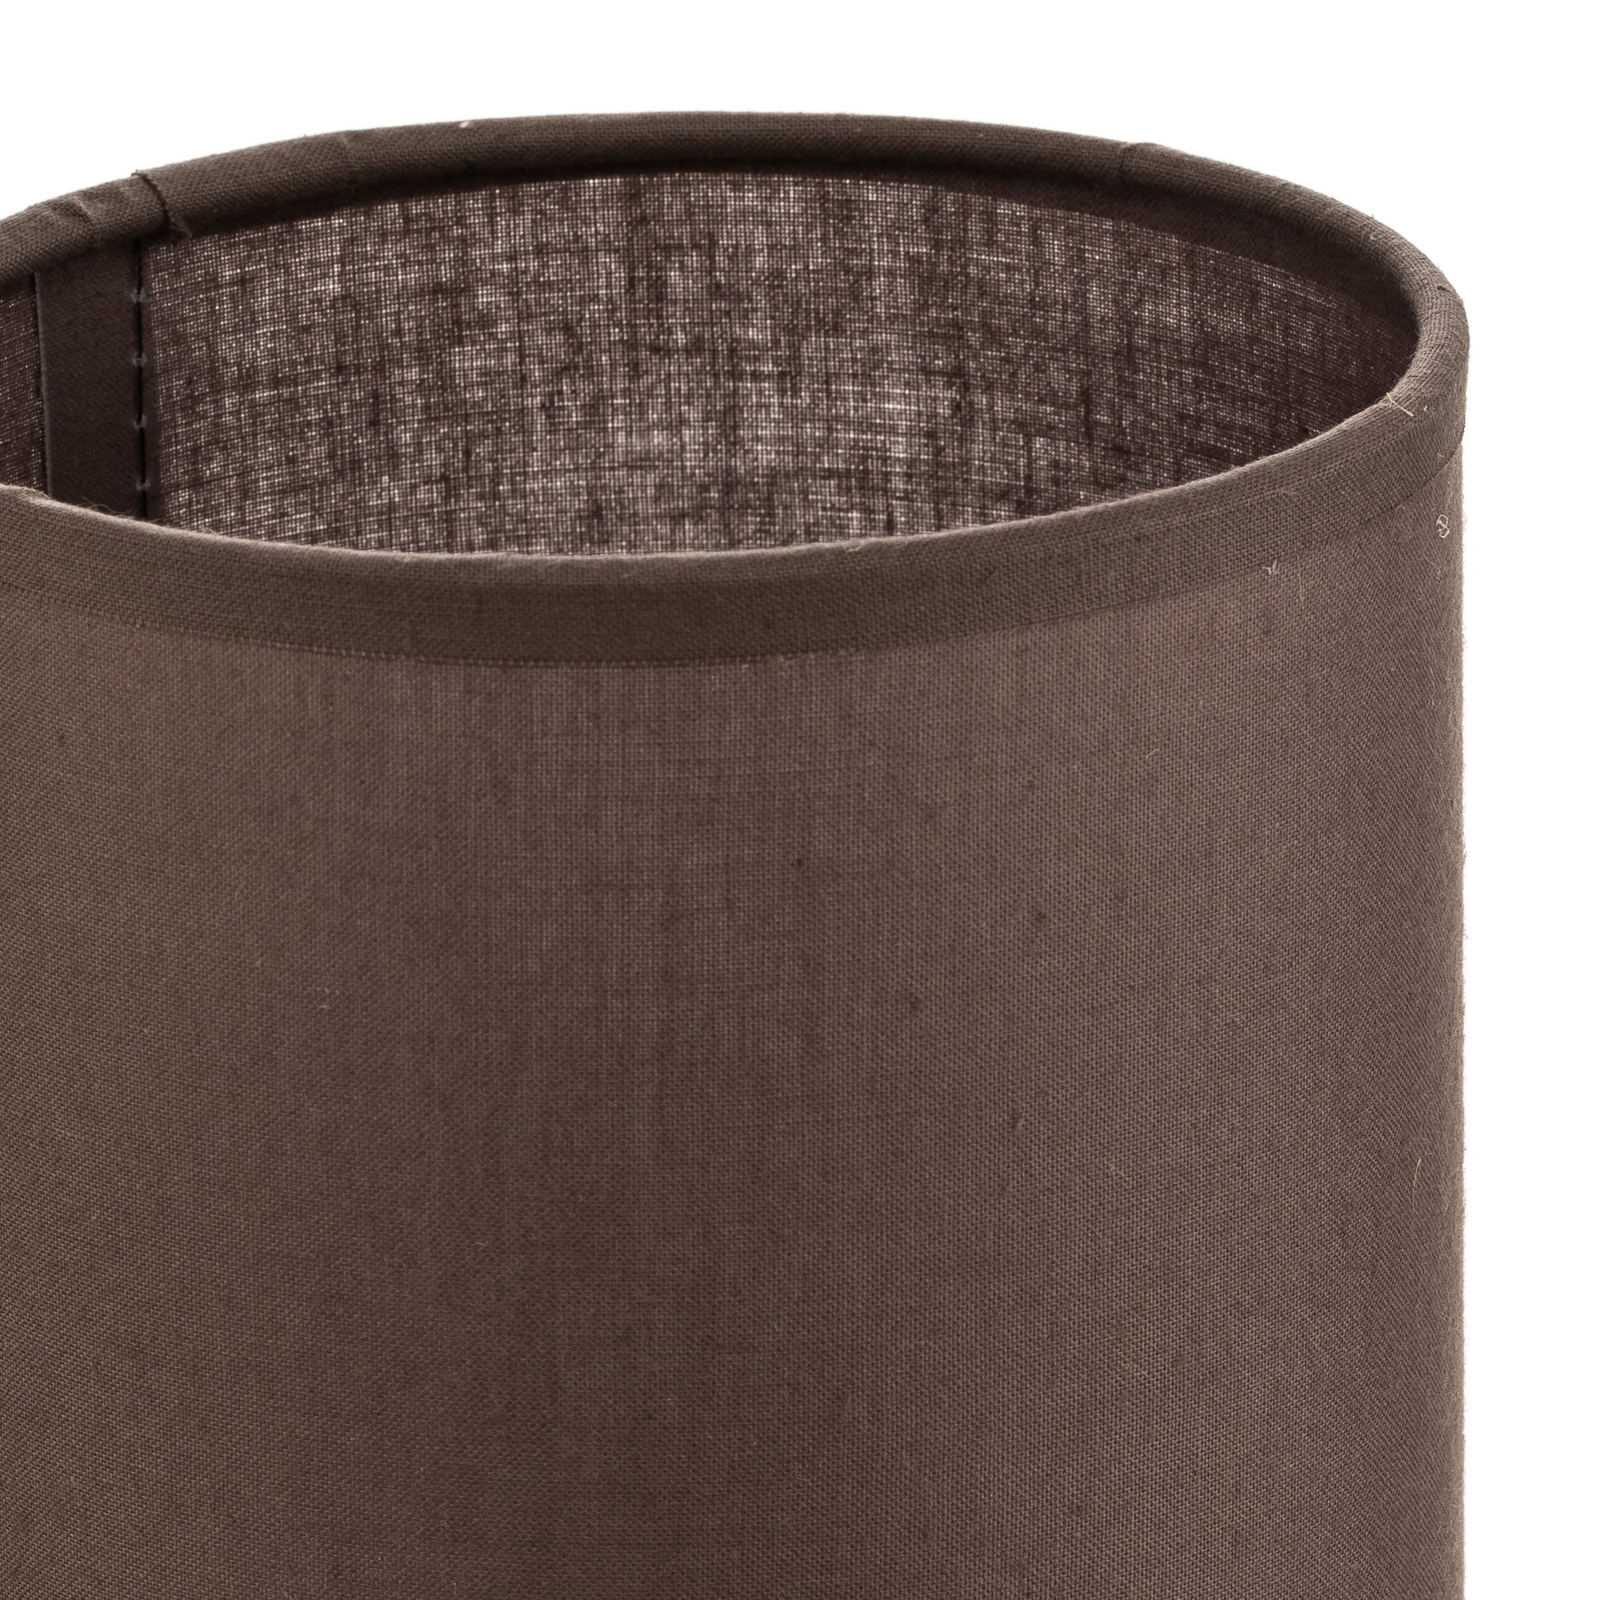 Roller lampshade earth brown Ø 13 cm, height 15 cm